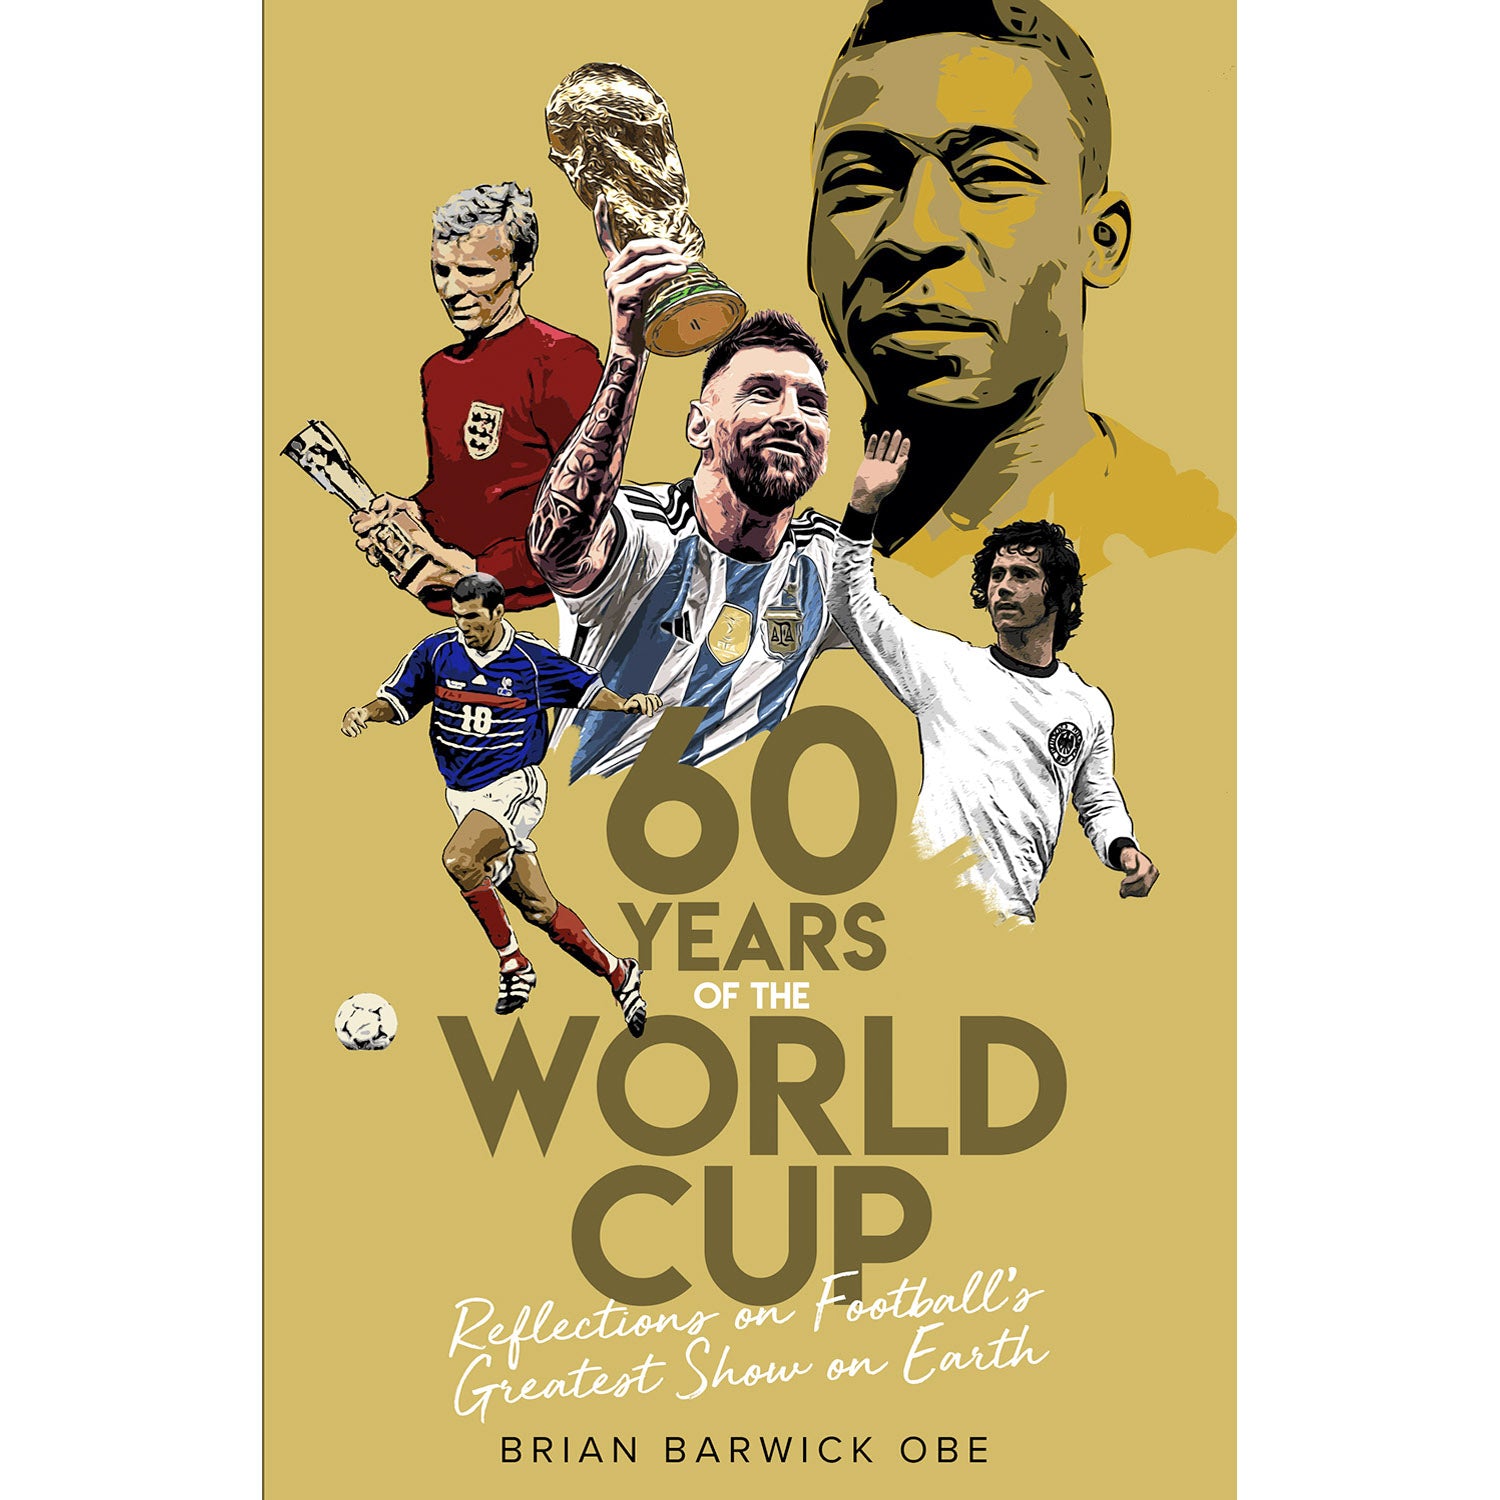 60 Years of the World Cup – Reflections on Football's Greatest Show on Earth